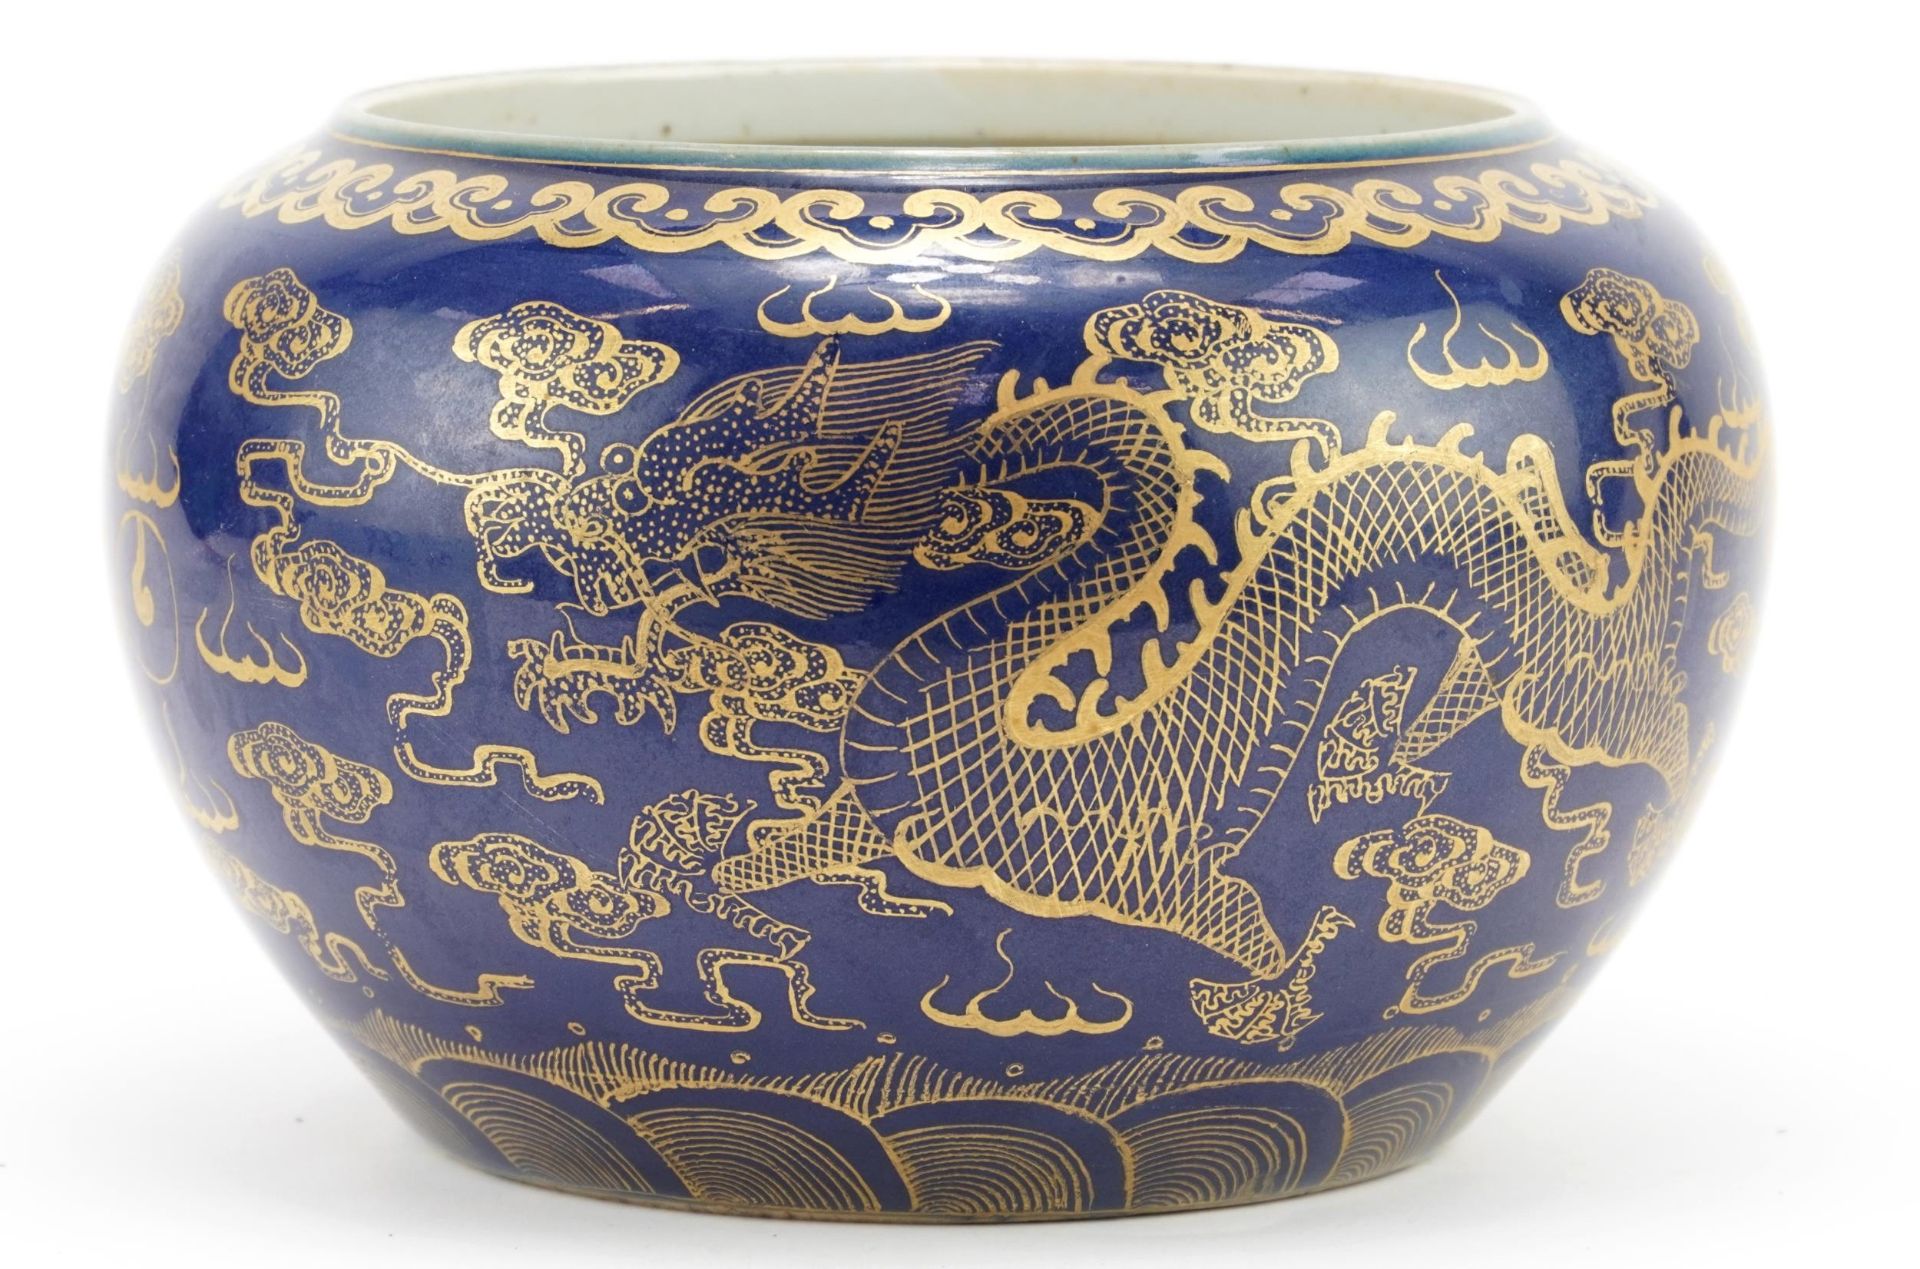 Chinese porcelain powder blue ground jardiniere gilded with dragons chasing the flaming pearl